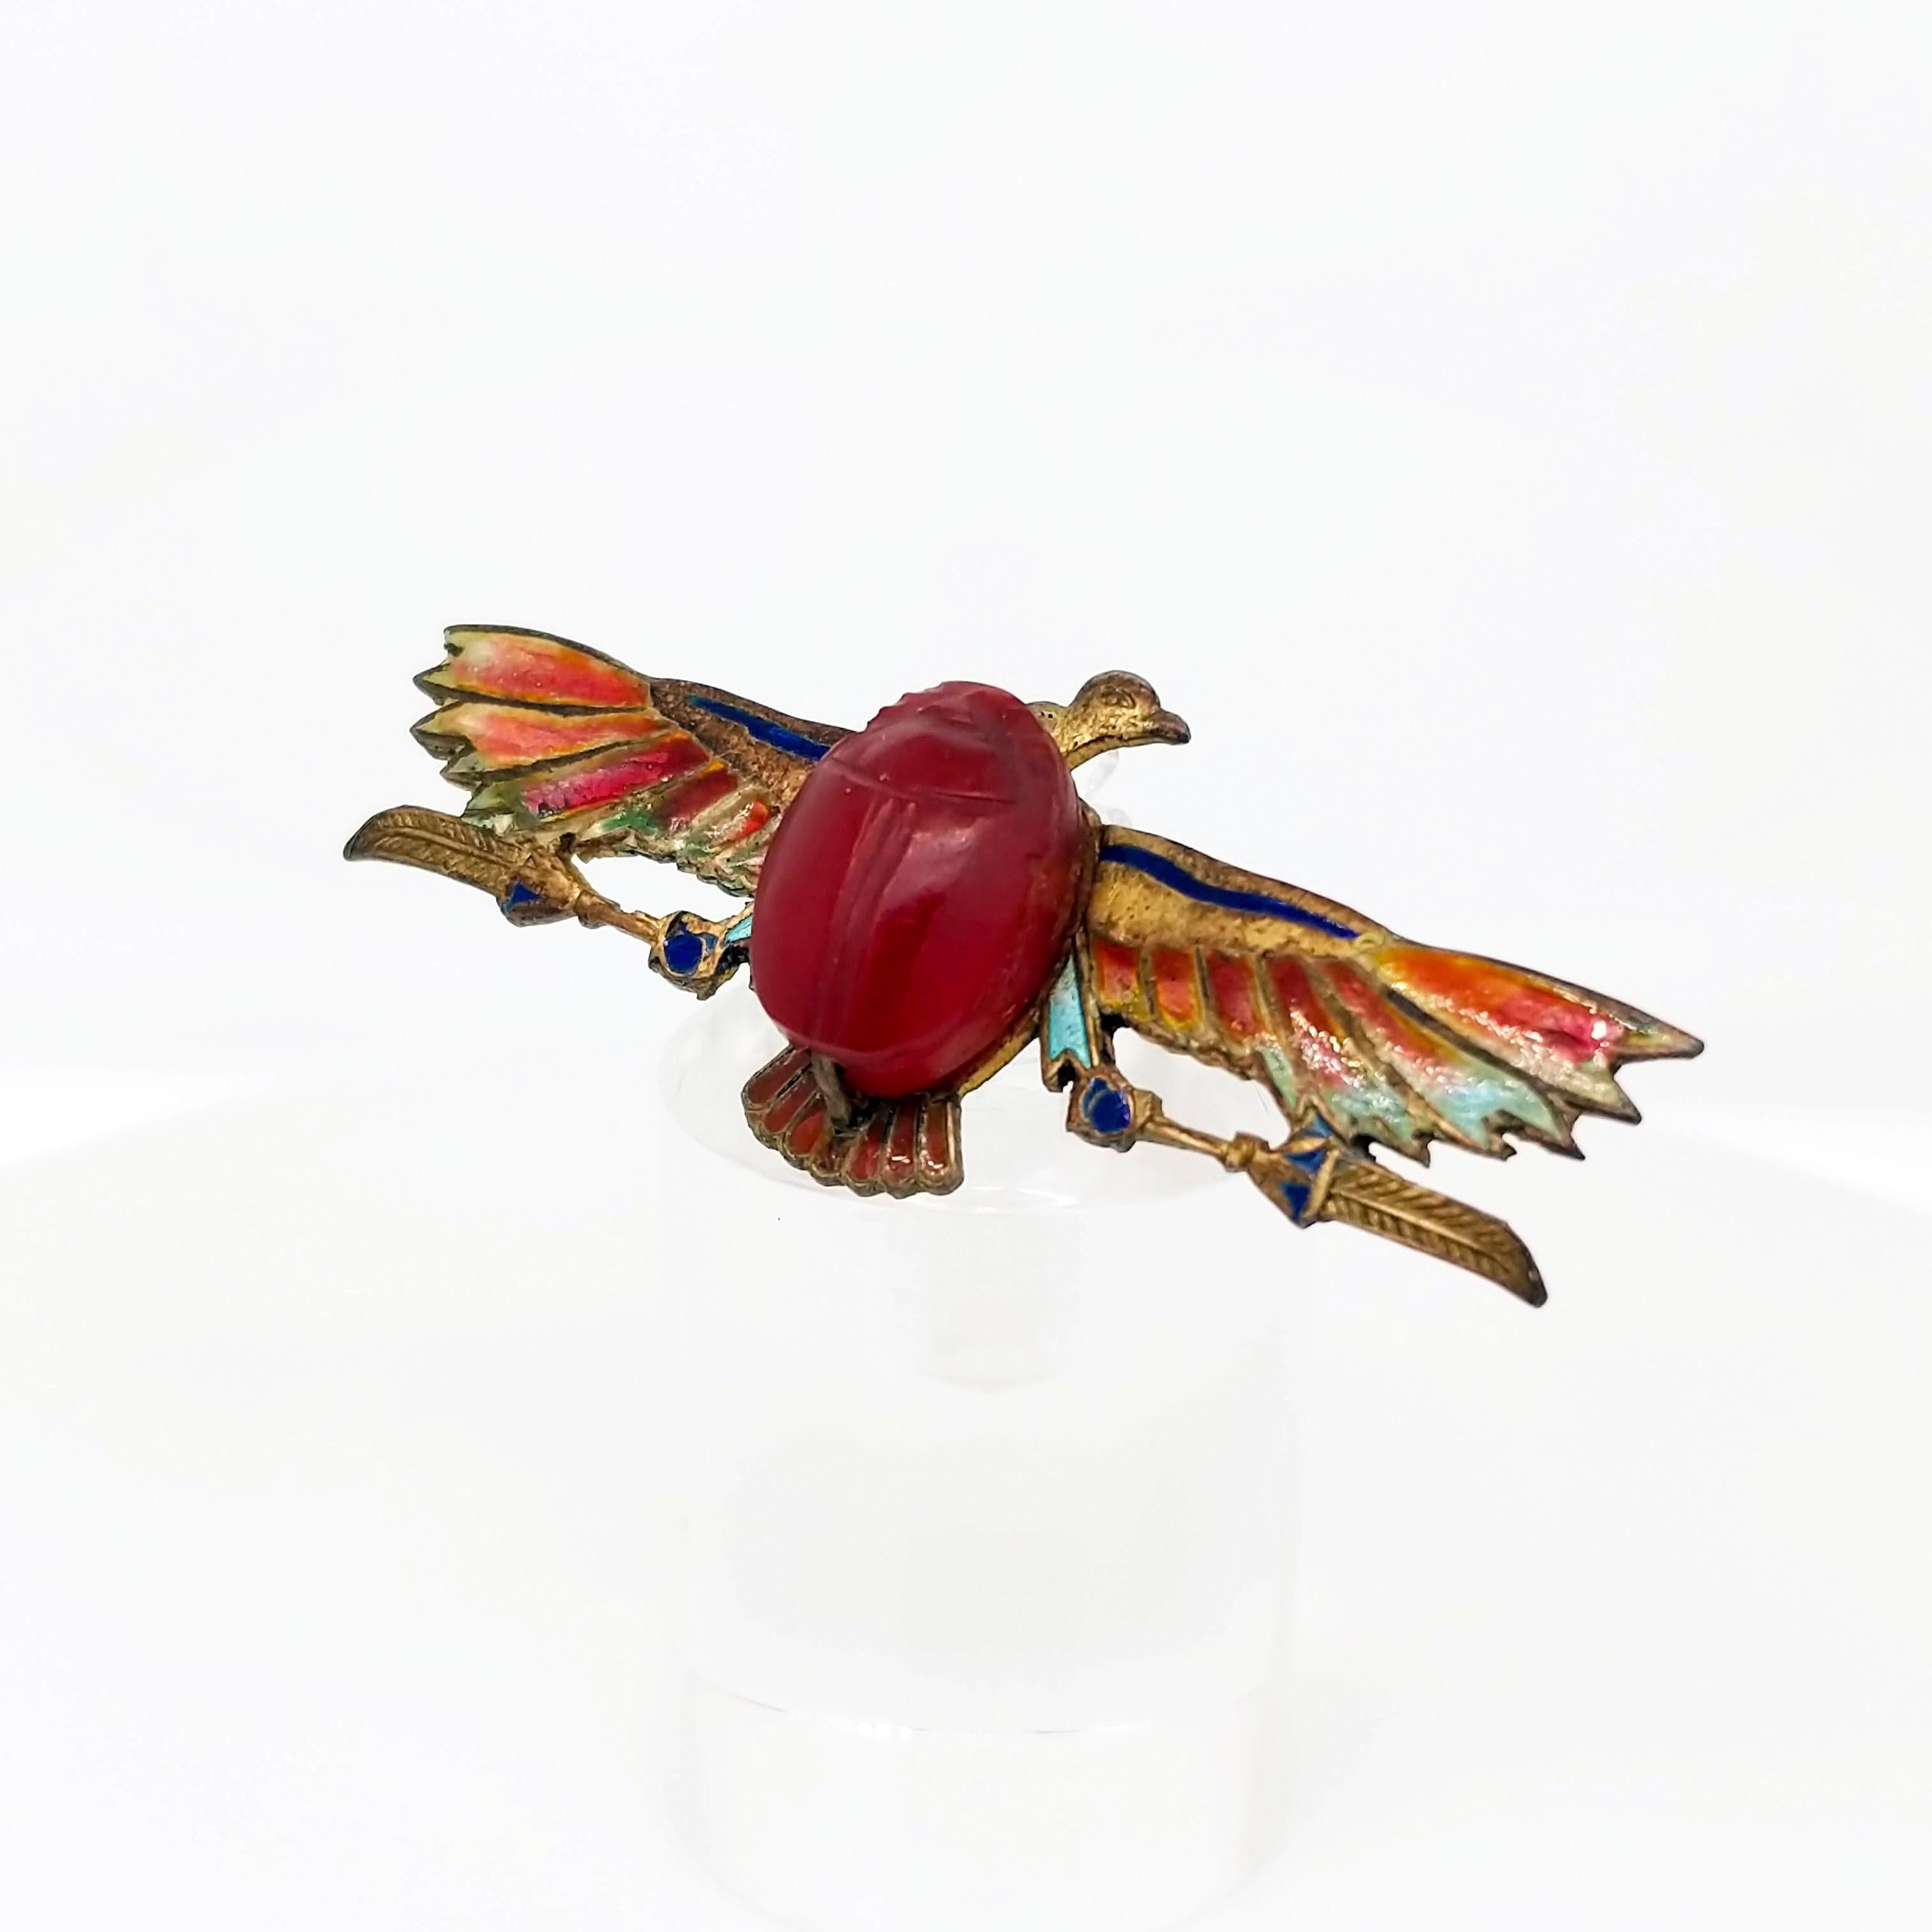 This pin is quite the piece! This Egyptian Revival pin features a lovely scarab in the center made of carved carnelian! The wings on this eagle are gorgeous plique-a-jour enamel - a technique that makes the final product translucent! As there is no